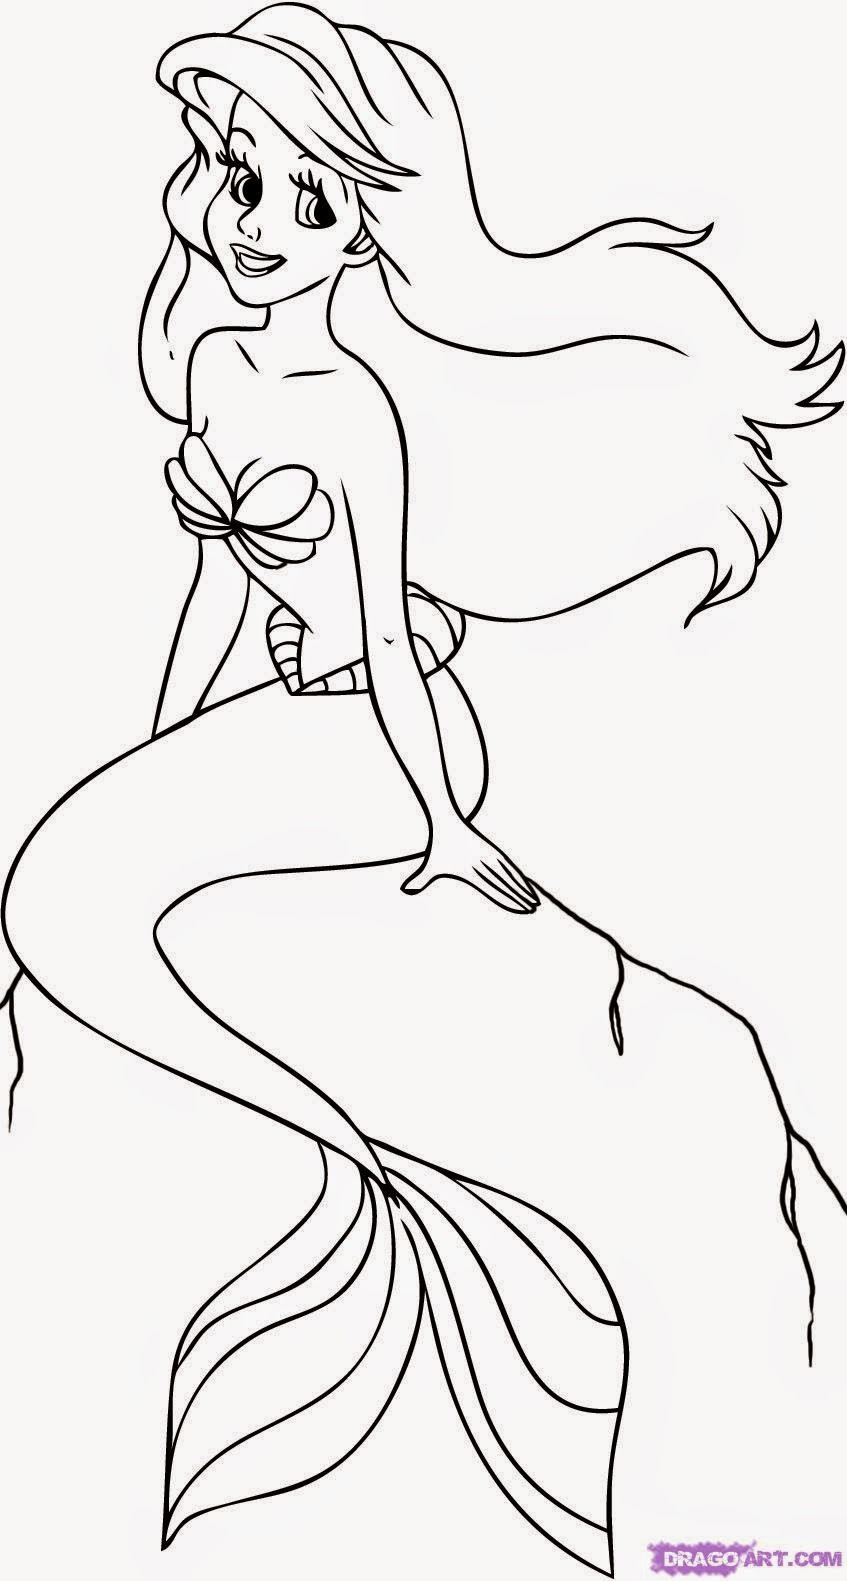 Ariel Coloring Pages Printable
 Coloring Pages Ariel the Little Mermaid Free Printable